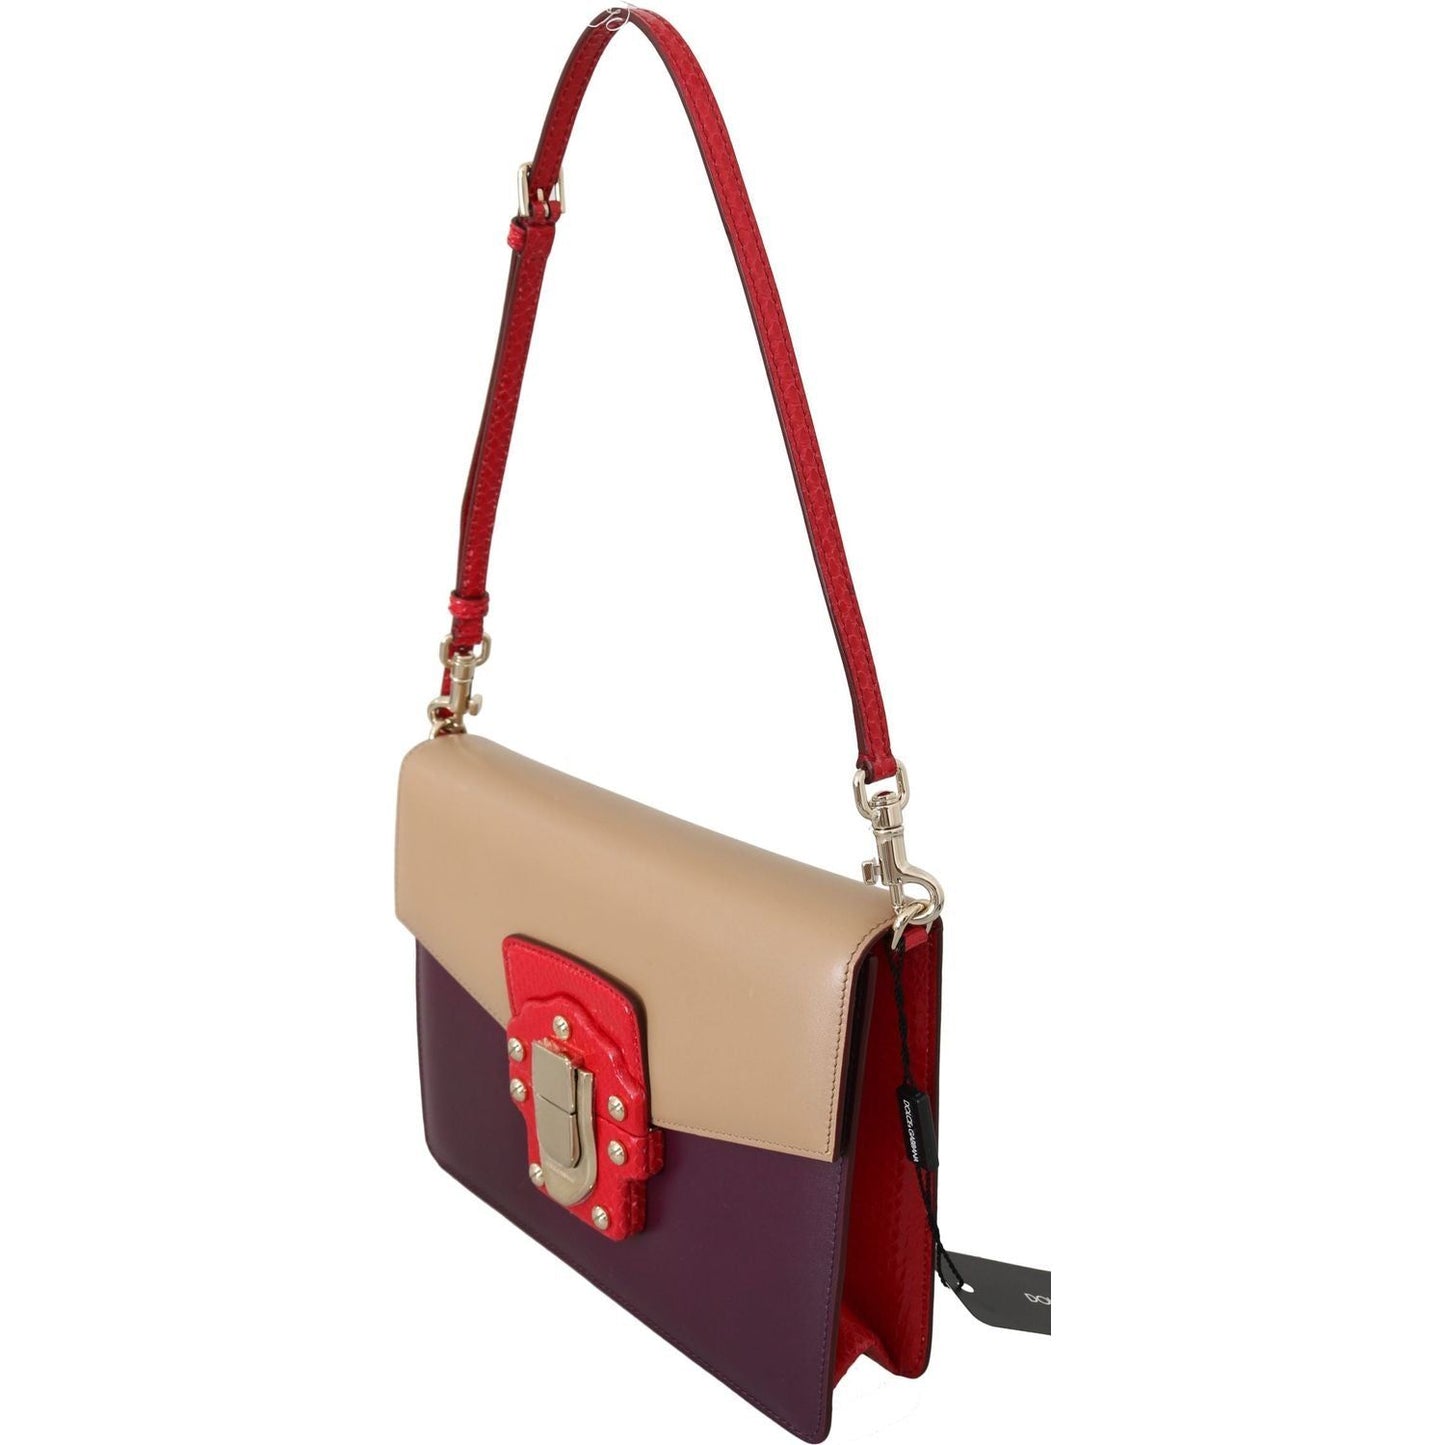 Dolce & Gabbana Exquisite LUCIA Leather Shoulder Bag purple-beige-red-leather-crossbody-purse-bag Purse IMG_0374-2-scaled-6783ffb1-76b.jpg